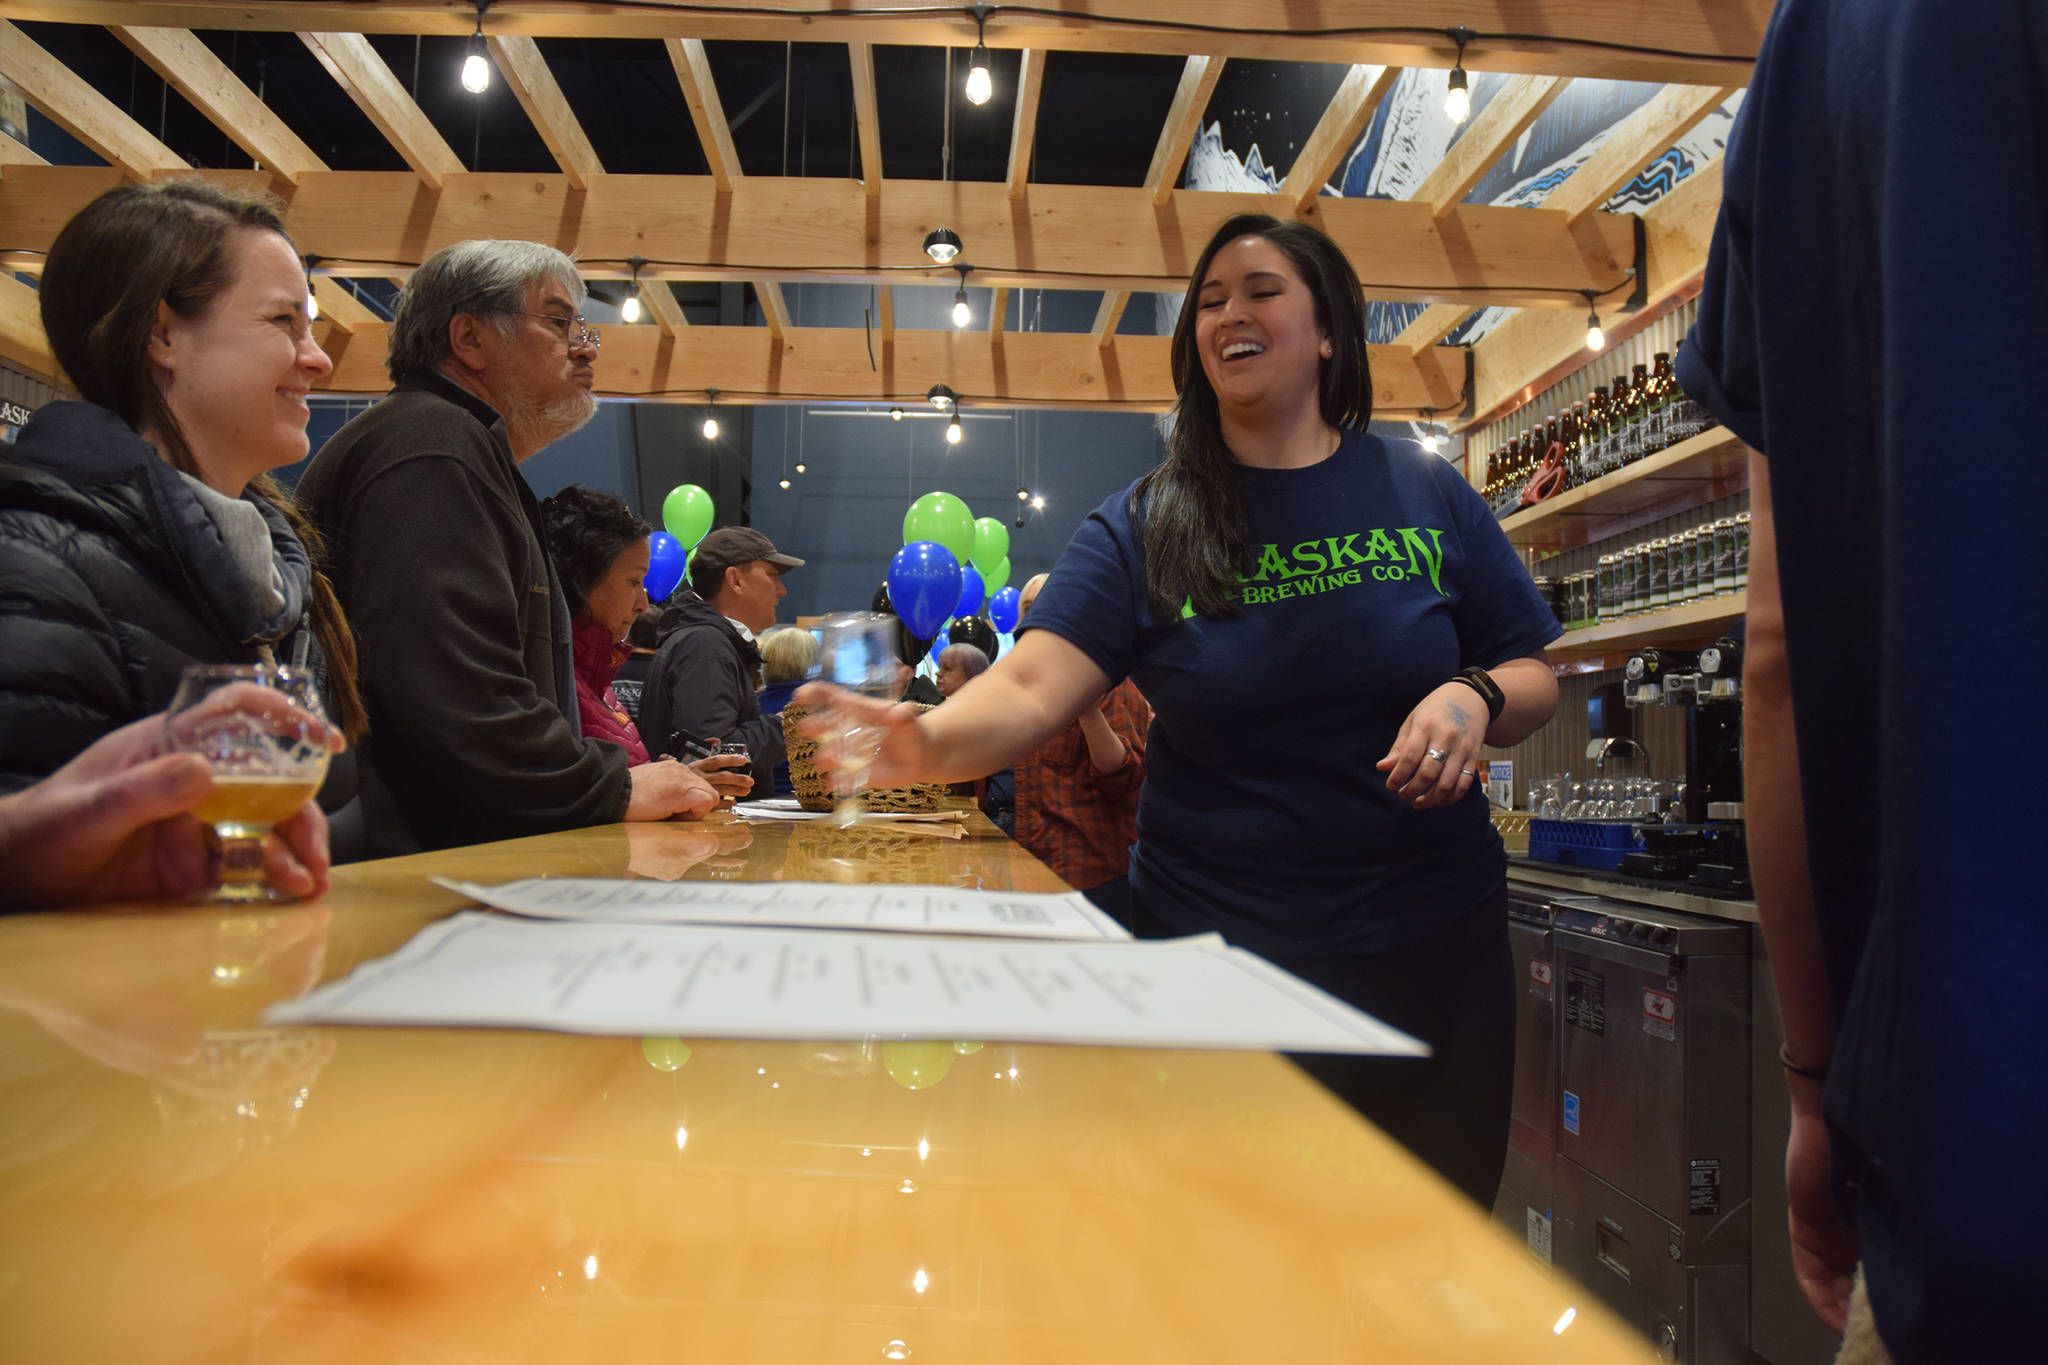 Alaskan Brewery Co.’s new tasting room, pictured here at its Saturday, Nov. 3 grand opening, boasts 20 taps. (Kevin Gullufsen | Juneau Empire)